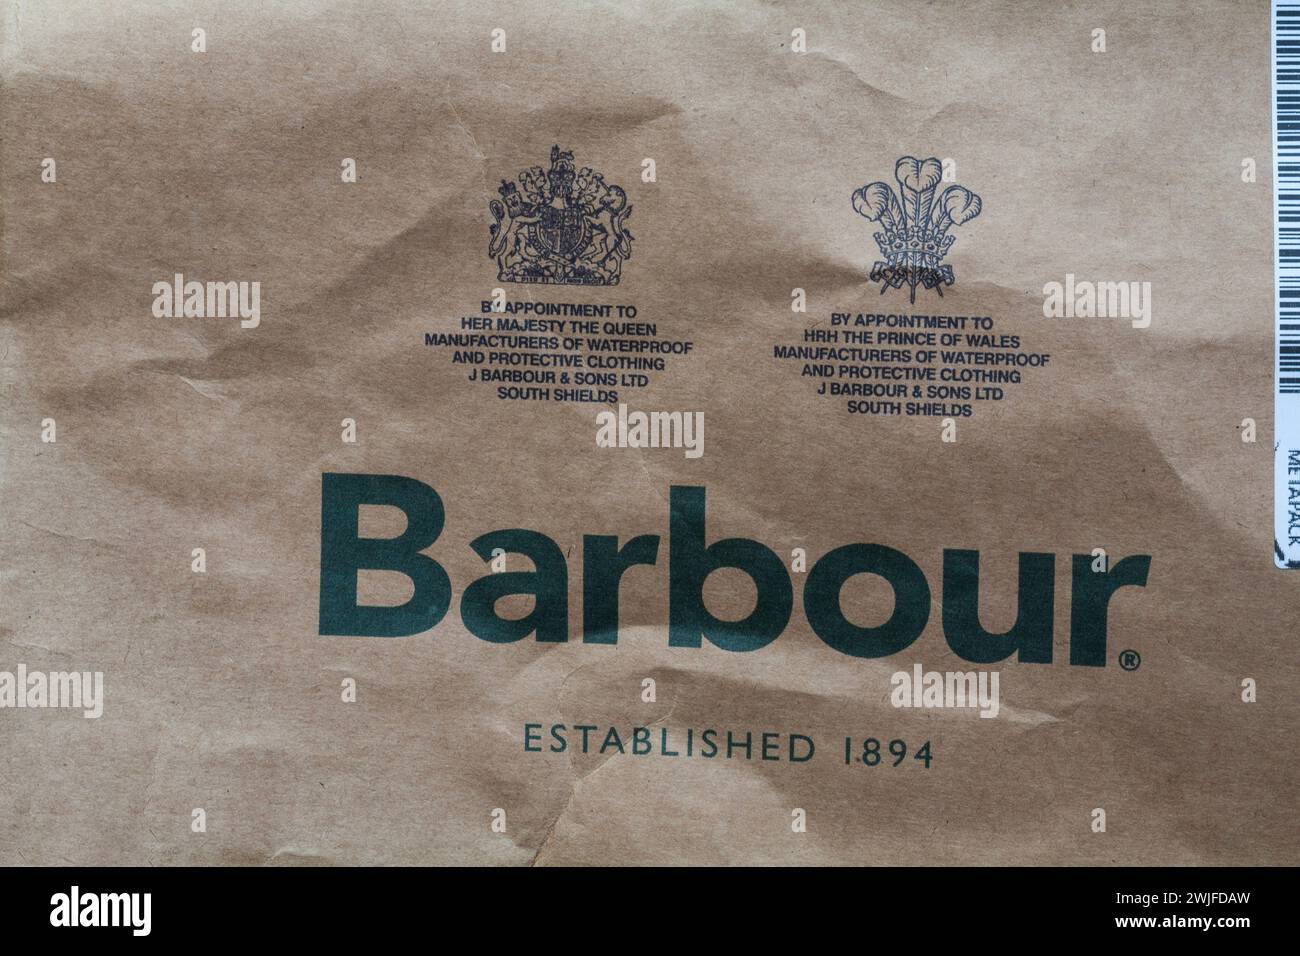 By appointment to her Majesty the Queen, By appointment to H.R.H. the Prince of Wales - Royal Warrants Royal Warrant on brown Barbour bag Stock Photo